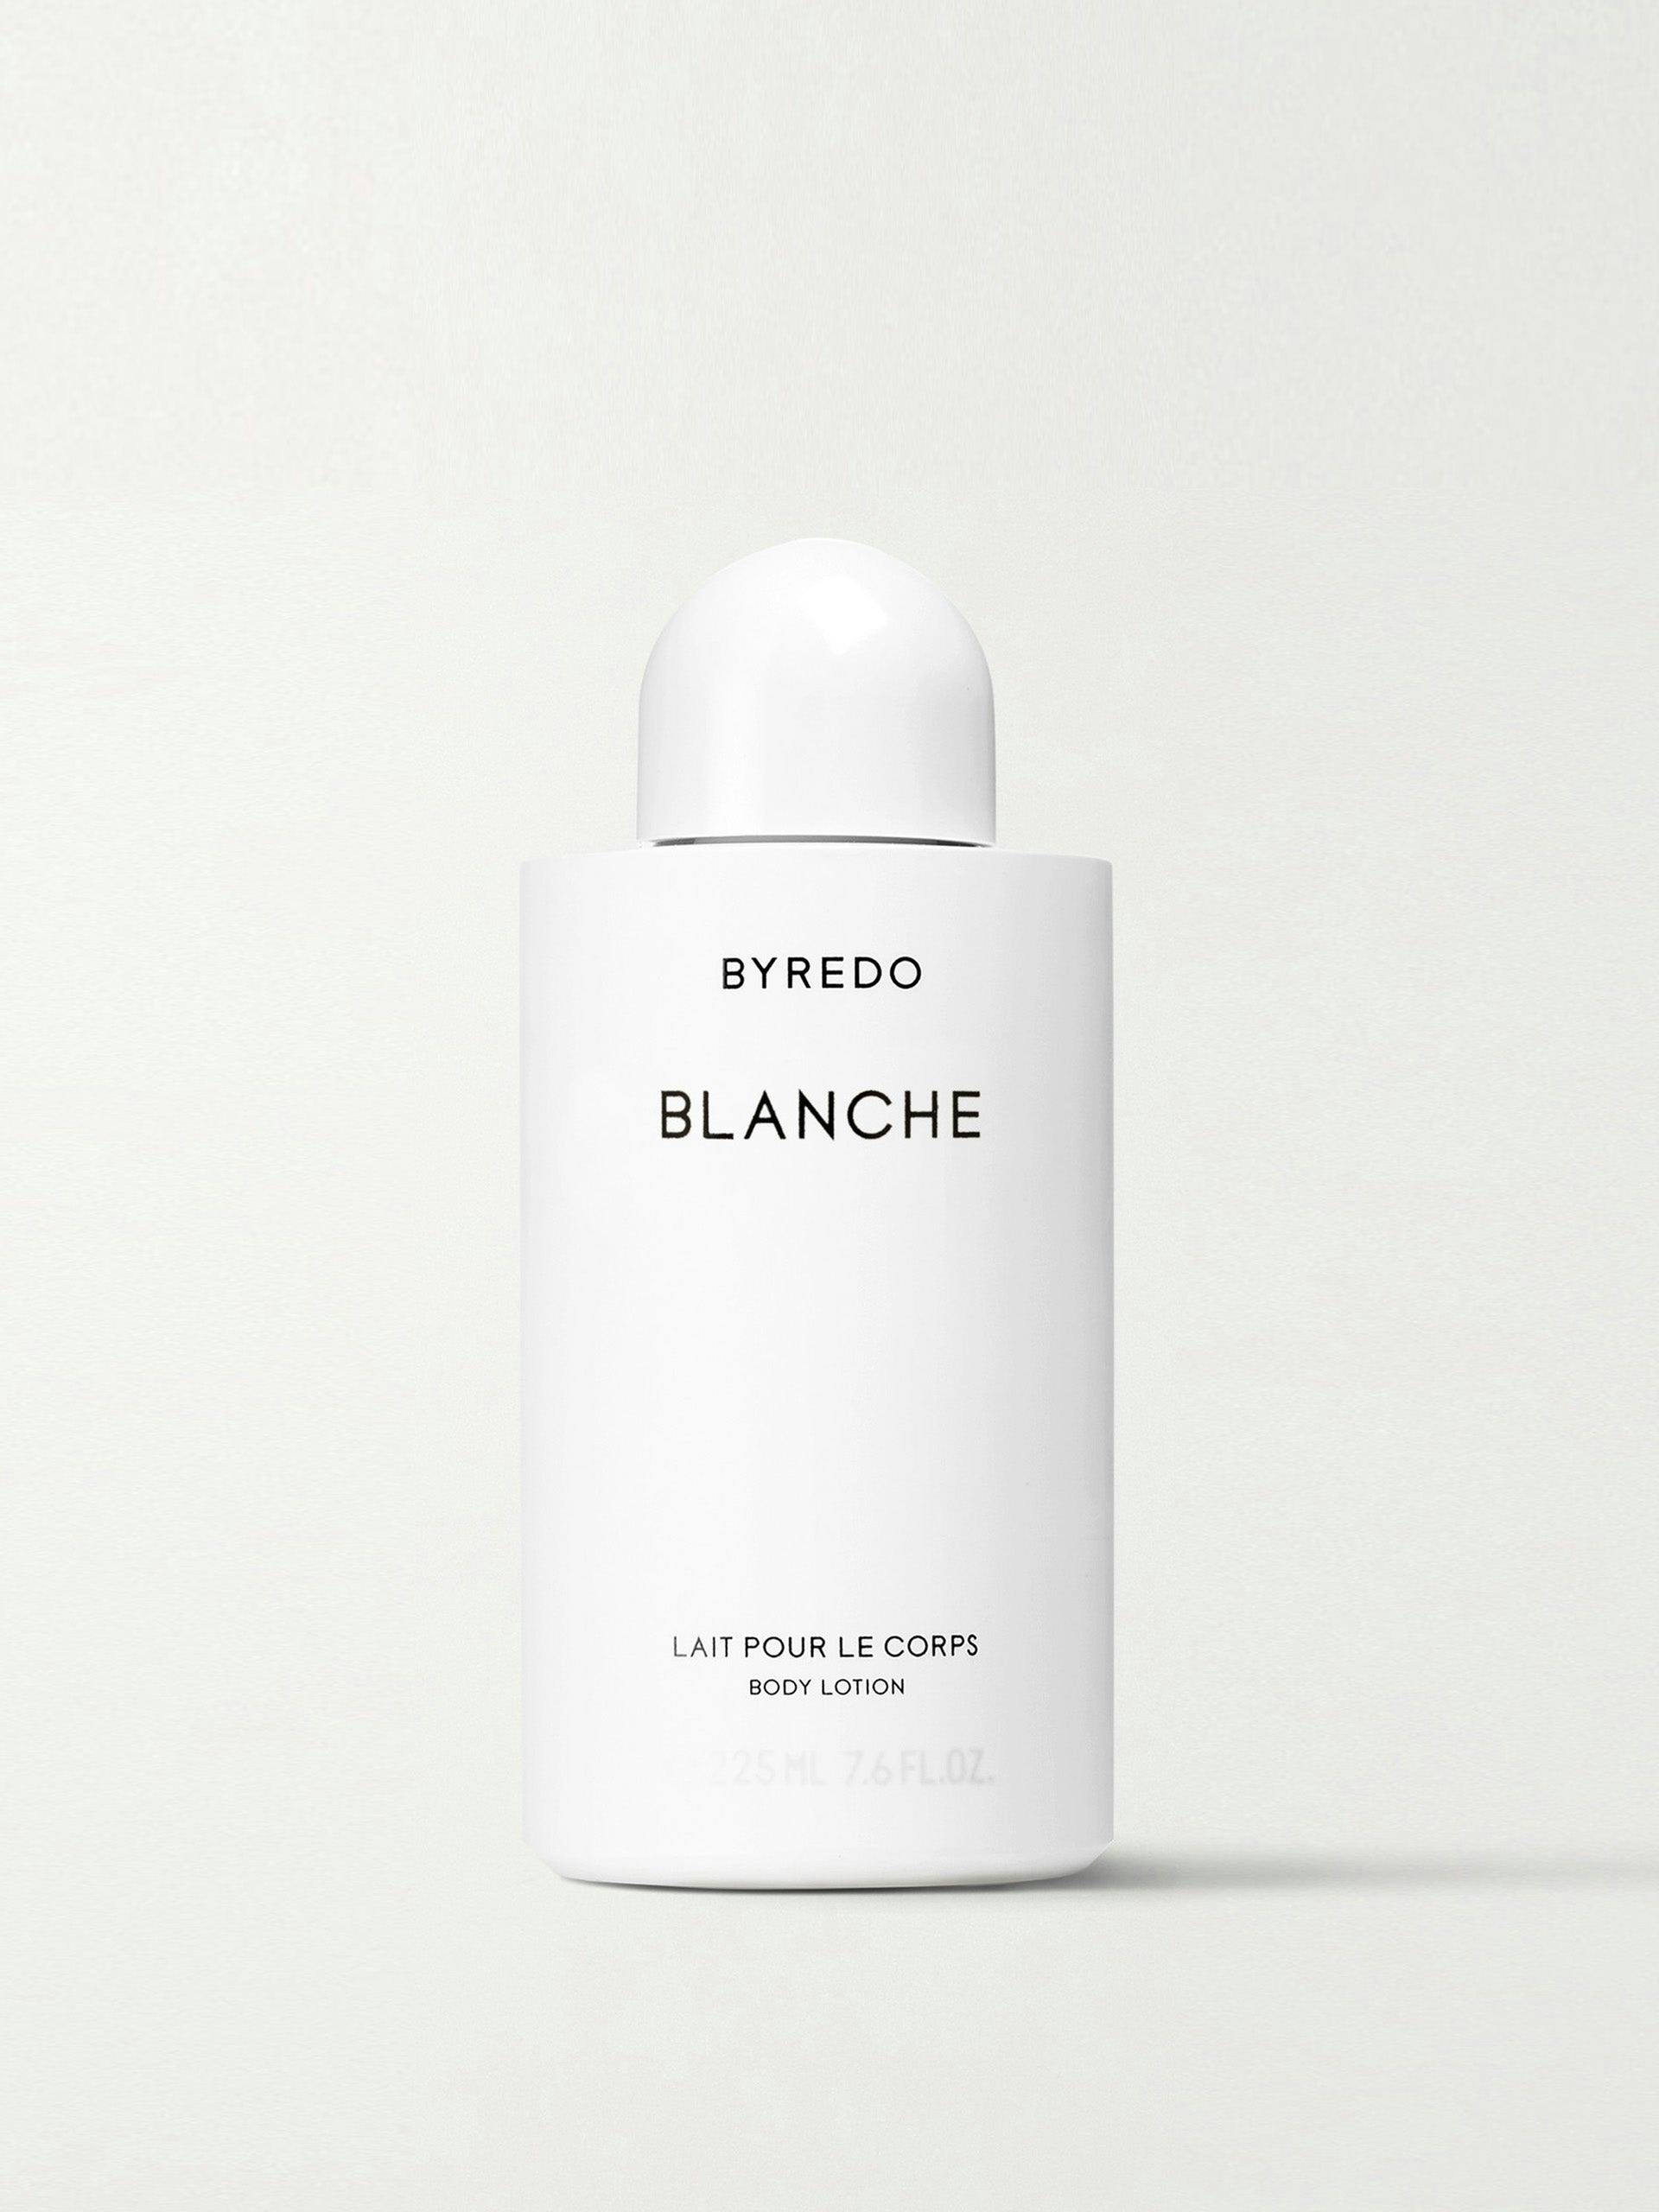 Blanche body lotion